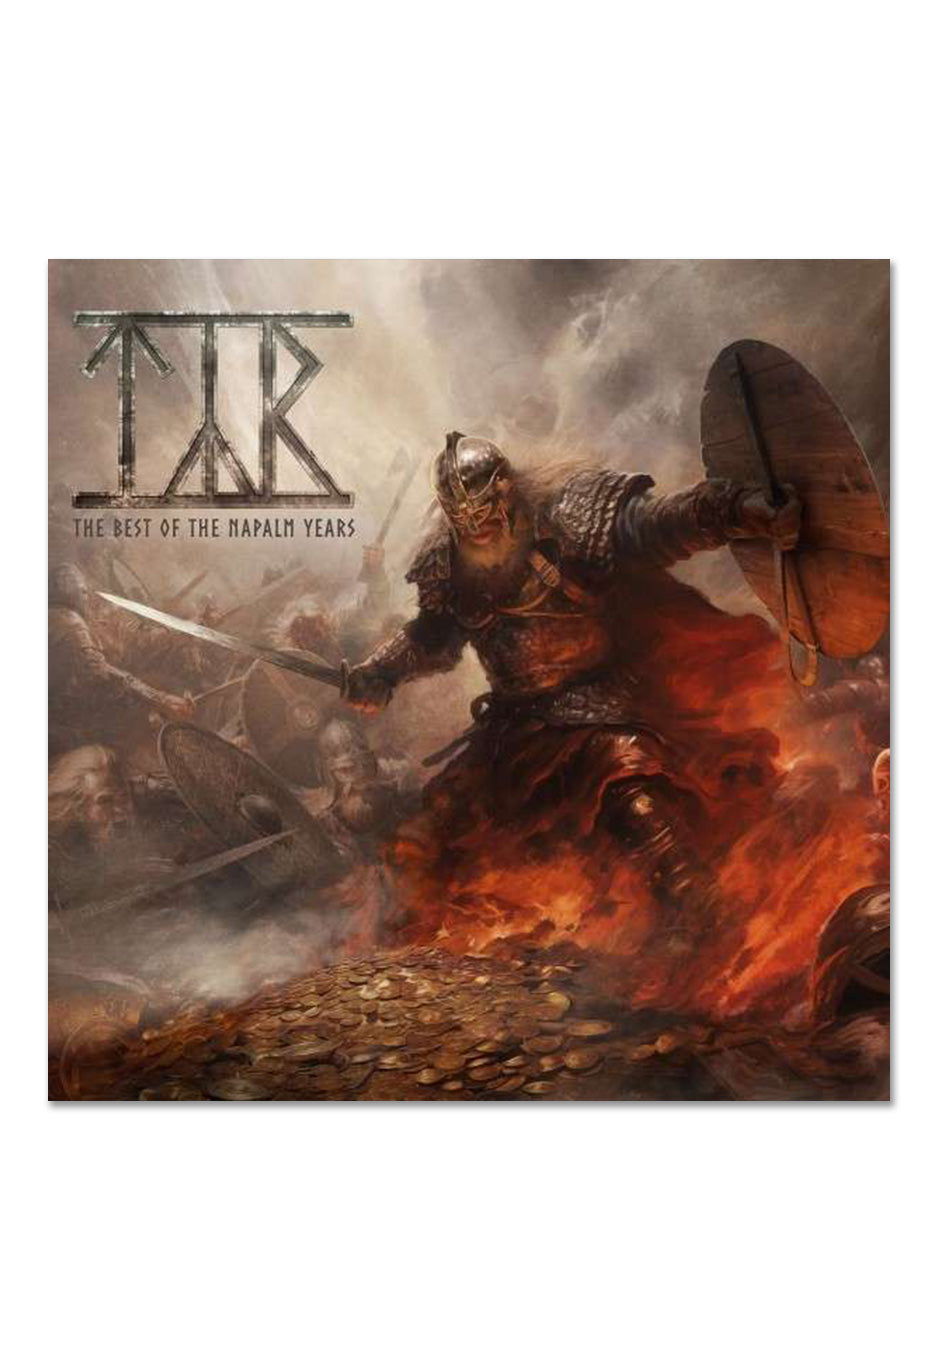 Týr - The Best Of: The Napalm Years - Digipak CD